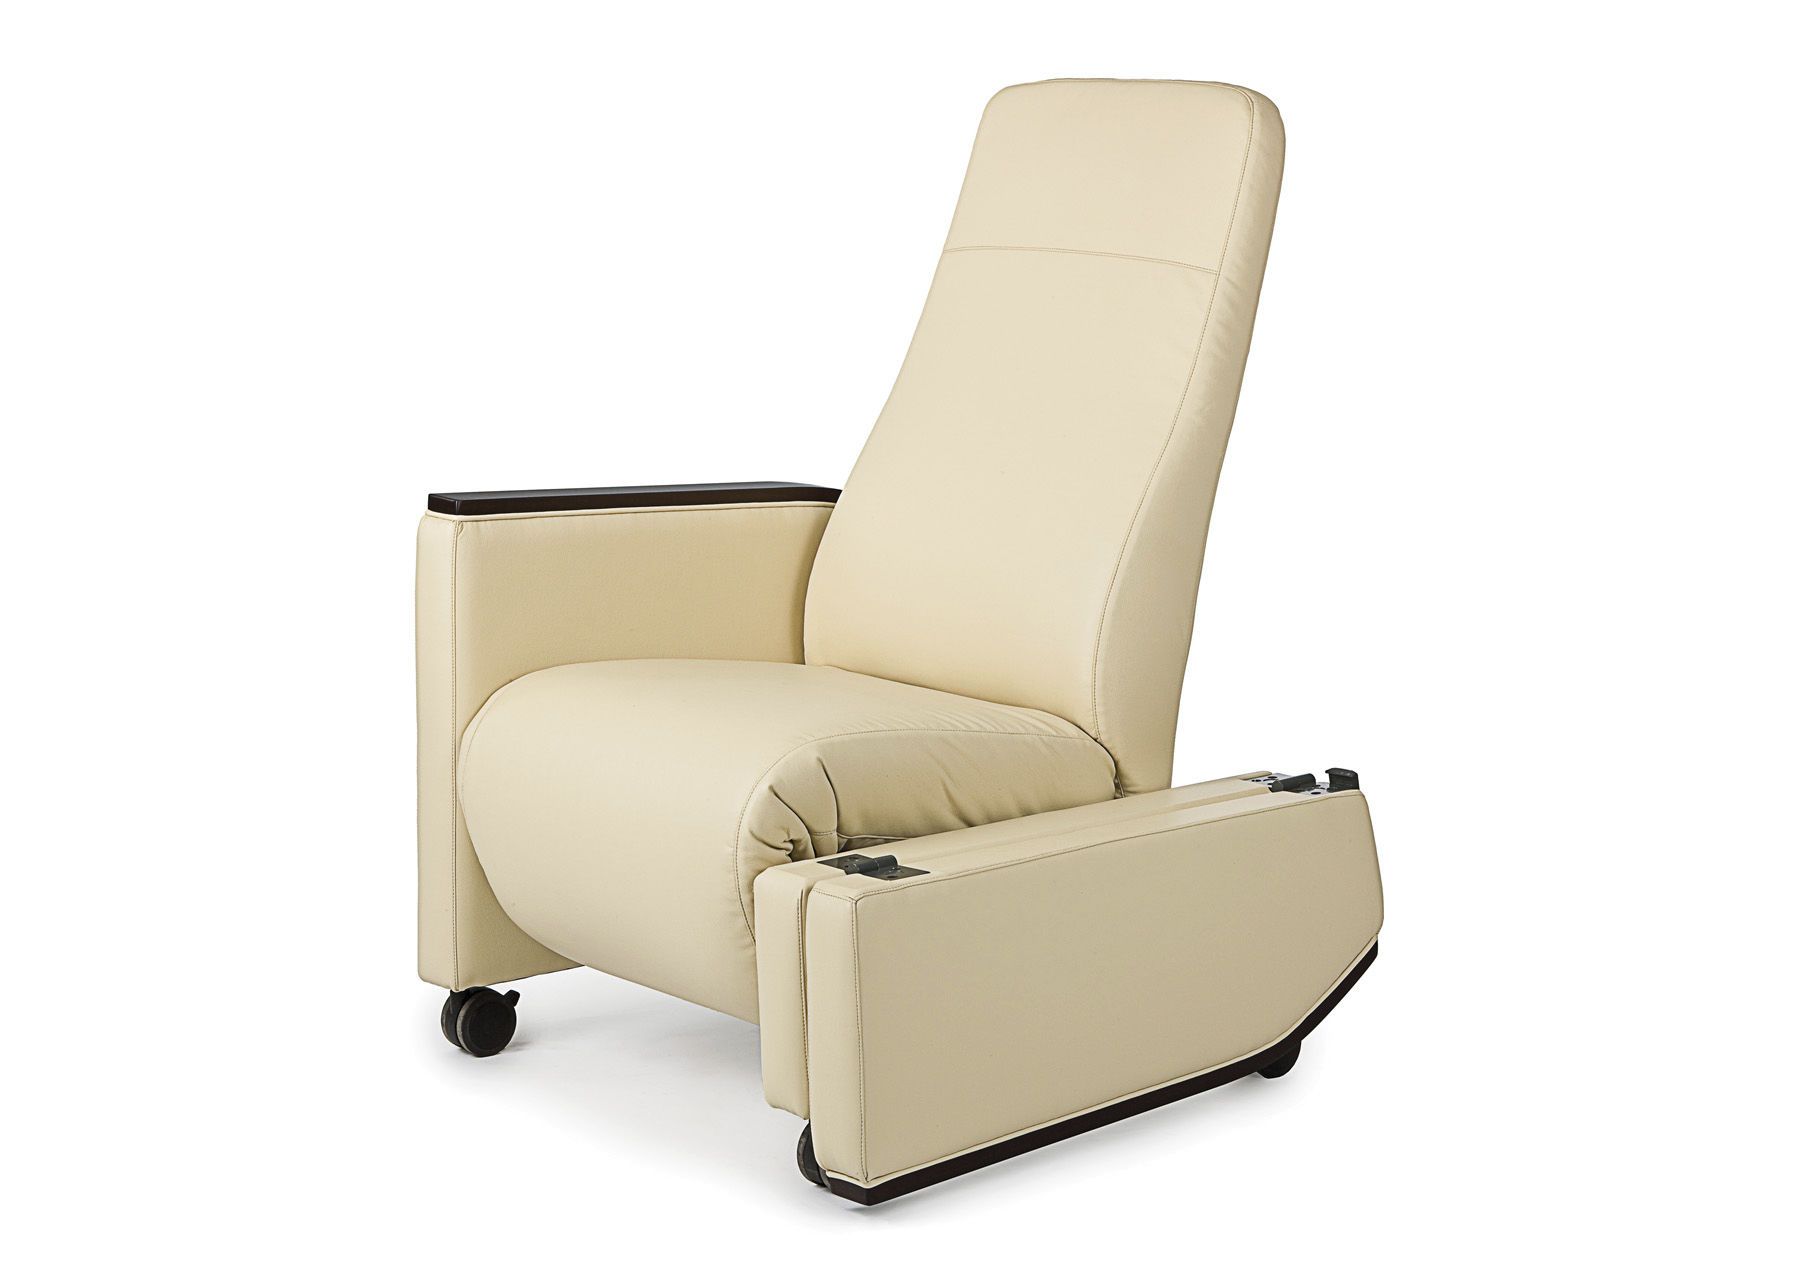 Medical sleeper chair / on casters / reclining / manual Transition series Cabot Wrenn Care